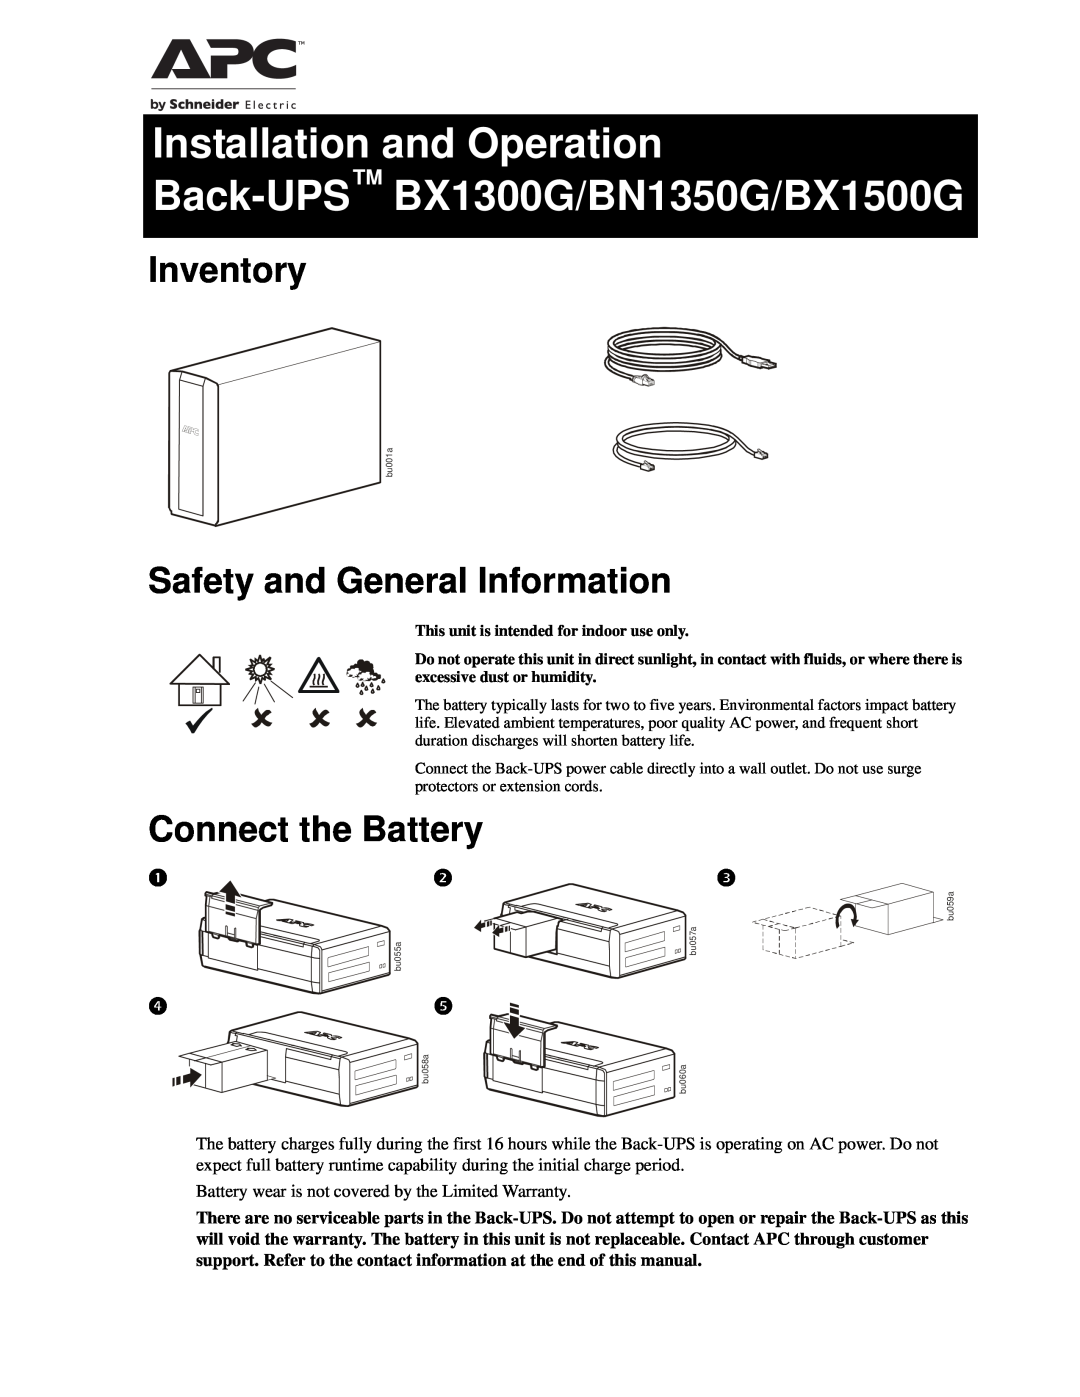 APC BX1300G, BN1350G, BX1500G warranty Inventory, Safety and General Information, Connect the Battery 